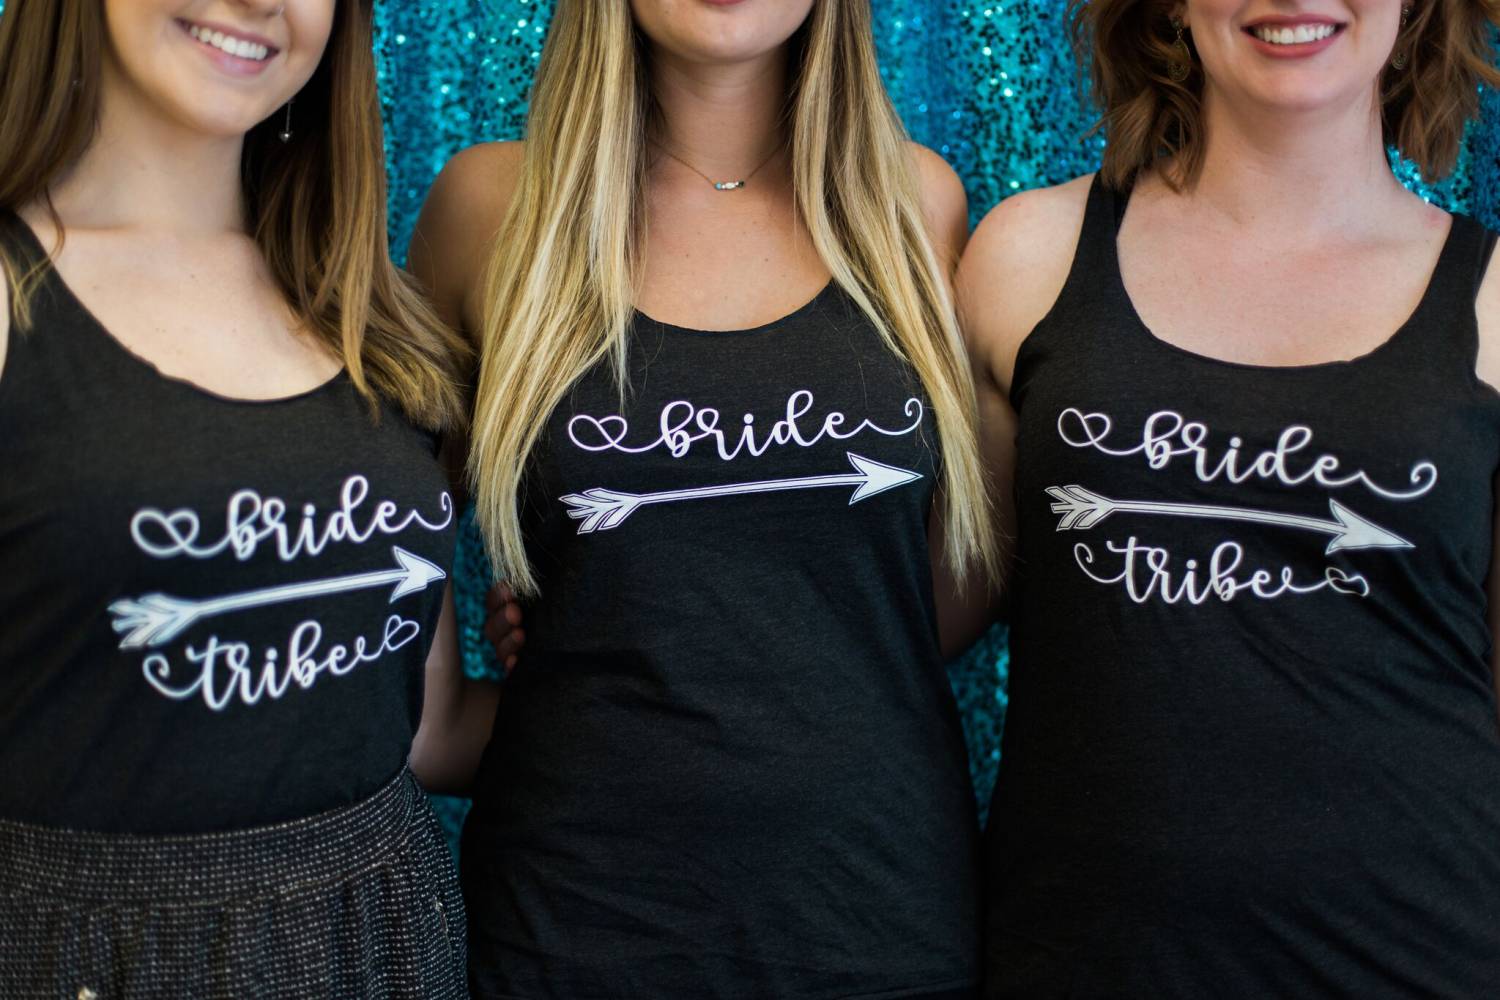 Tanks for you and your girls!